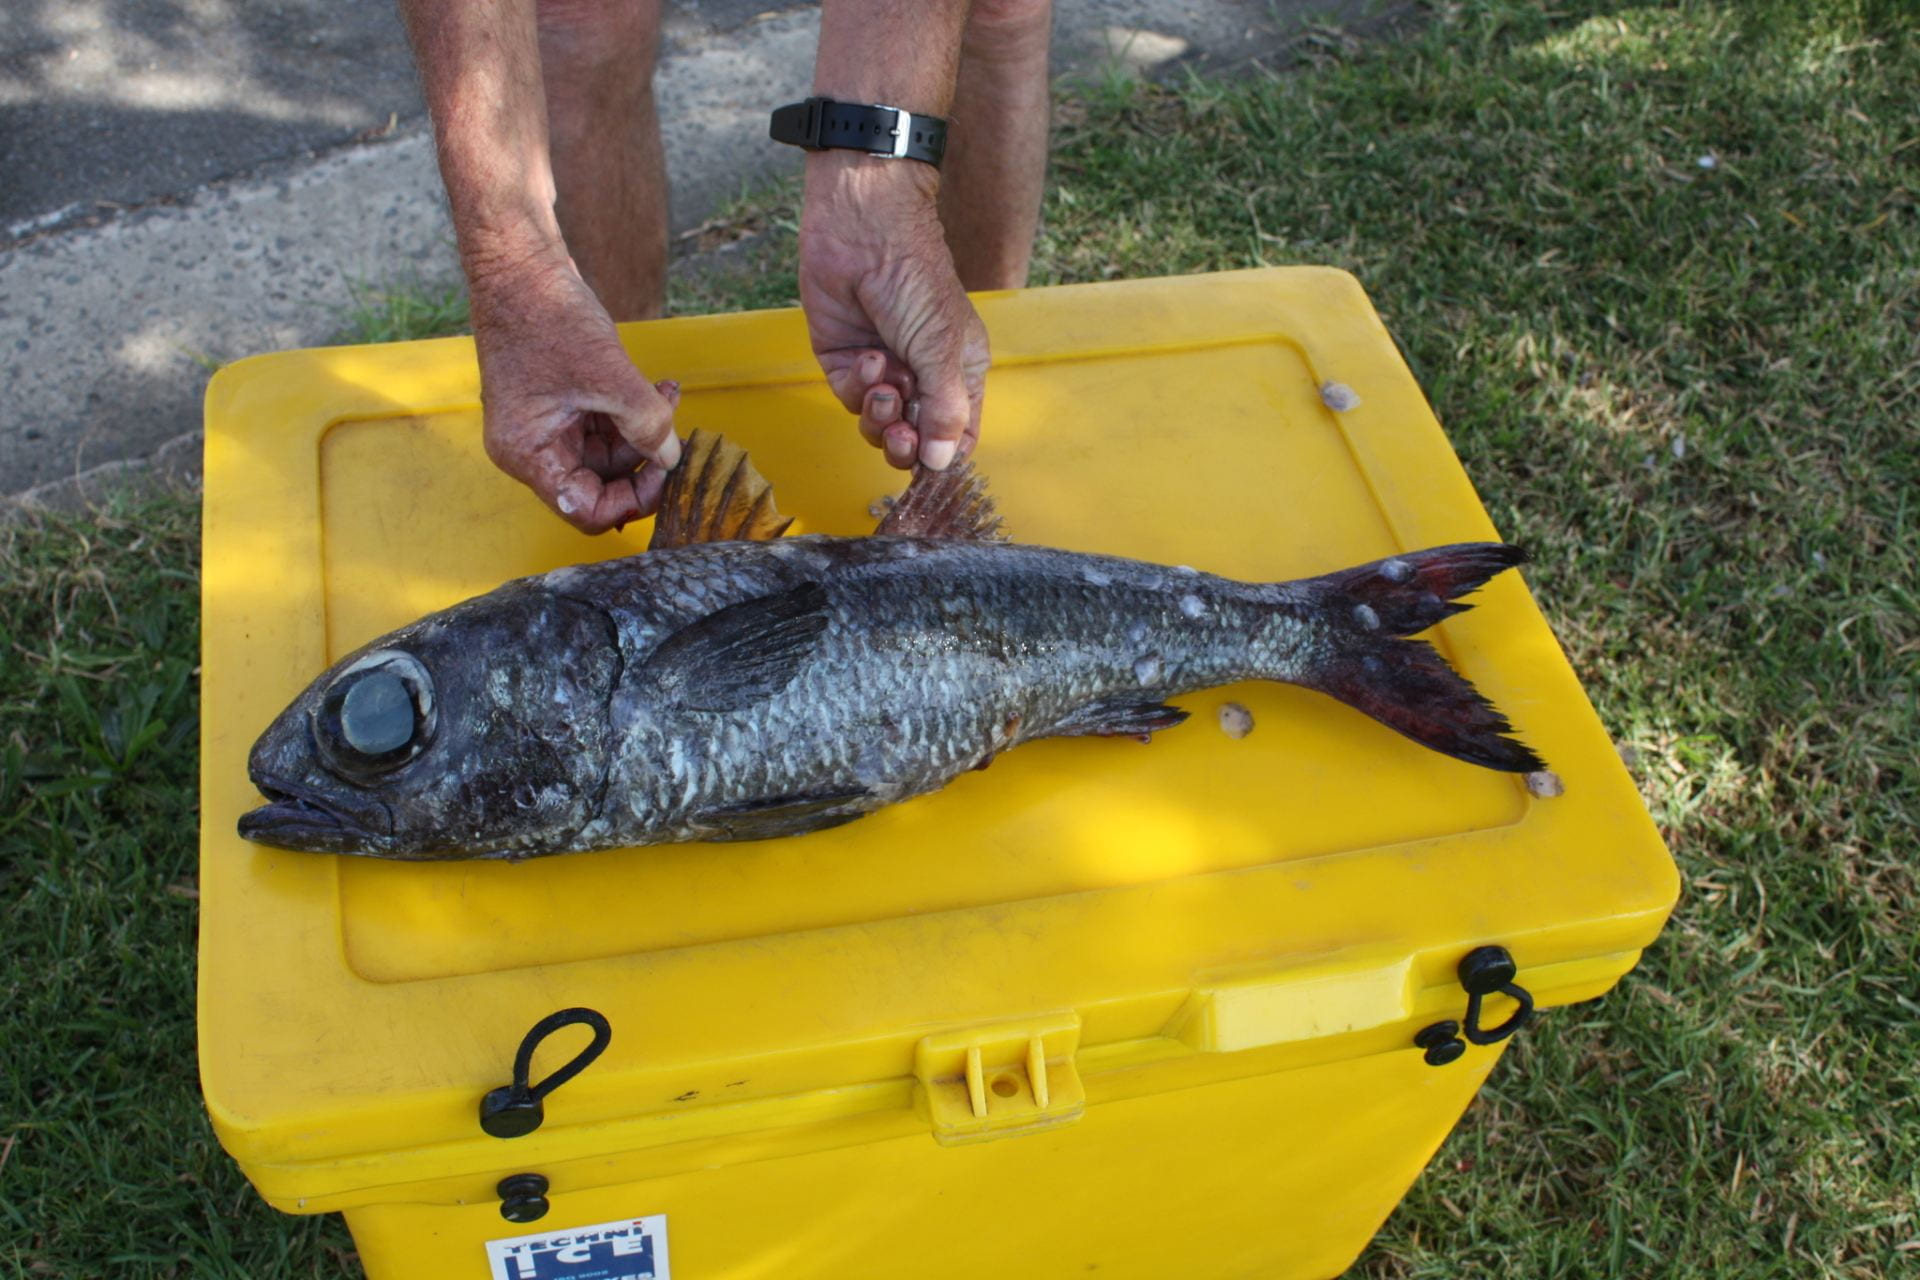 A black fish on a yellow plastic tub with a person's hands fanning out the fish's dorsal fin